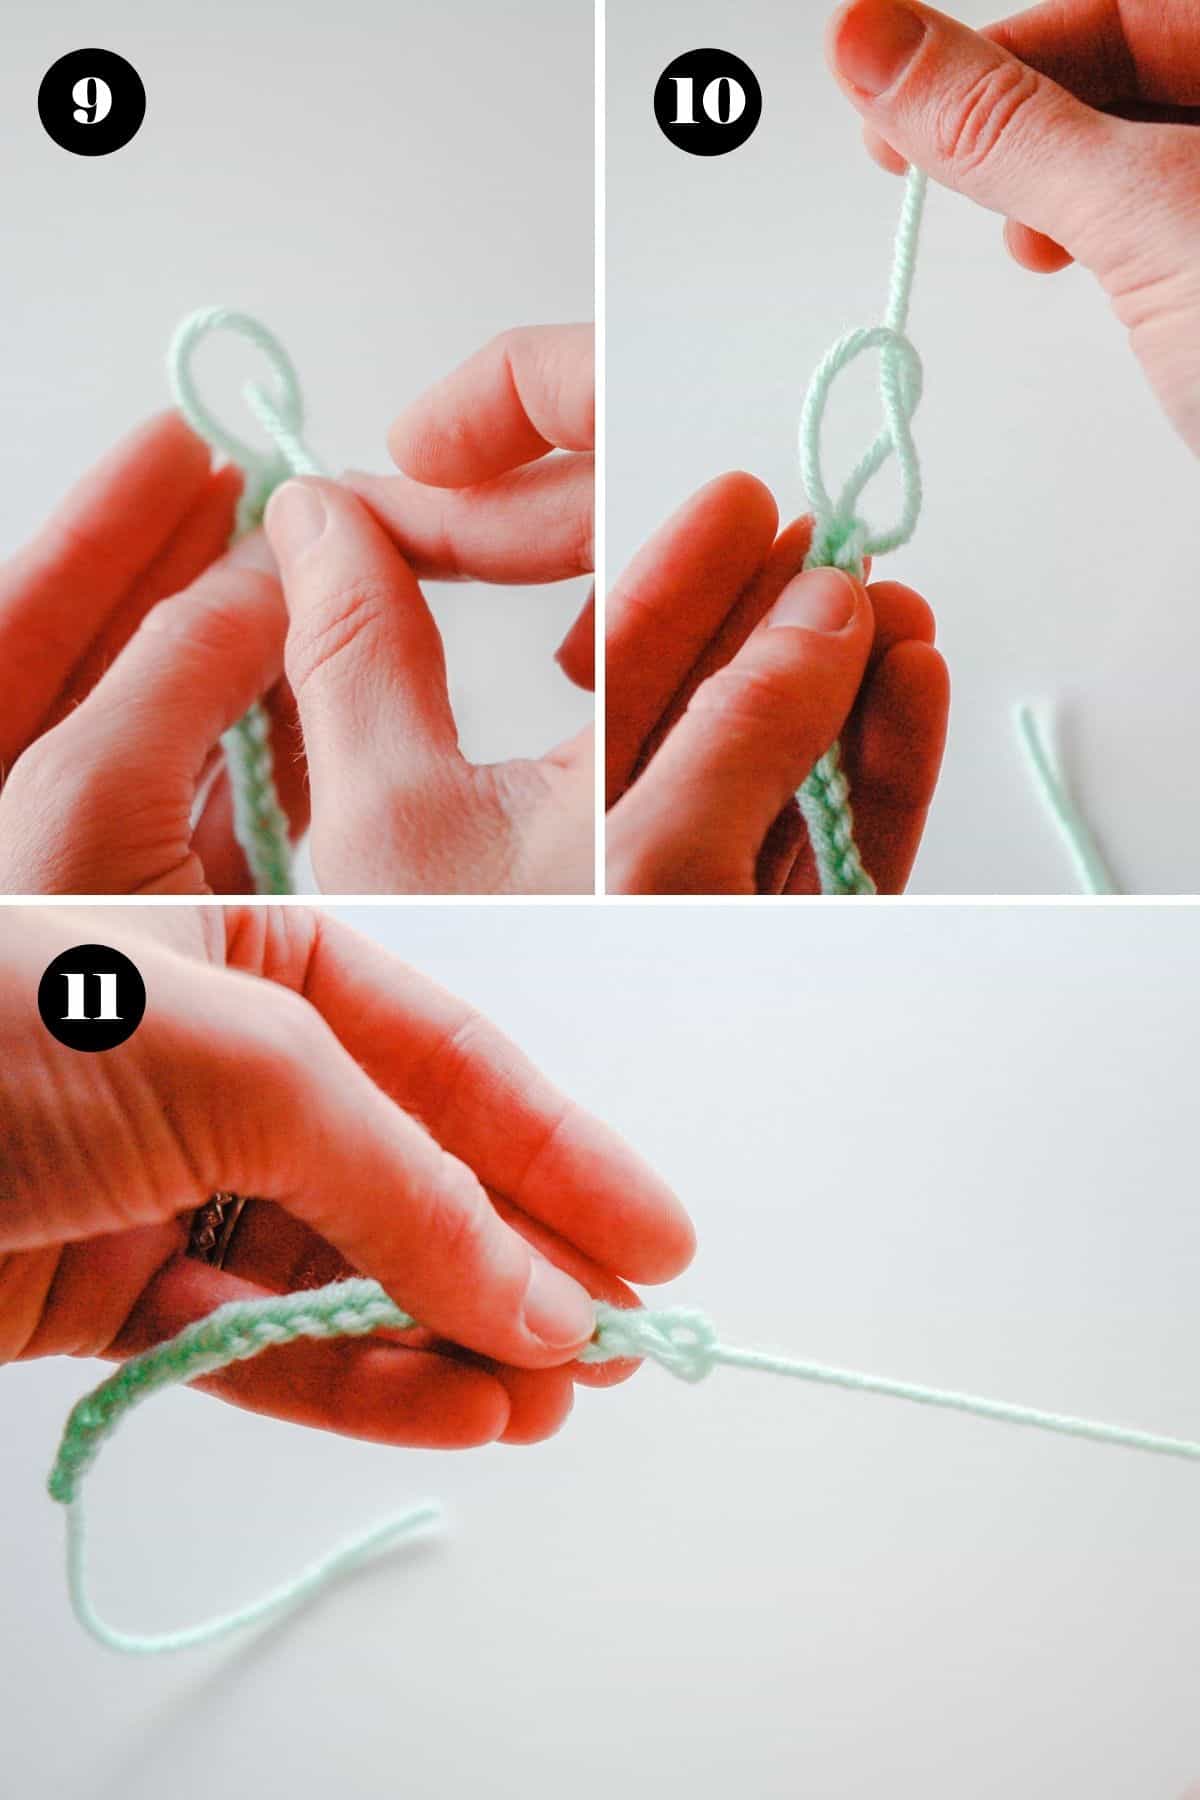 Steps to make a yarn bracelet out of one piece of string.